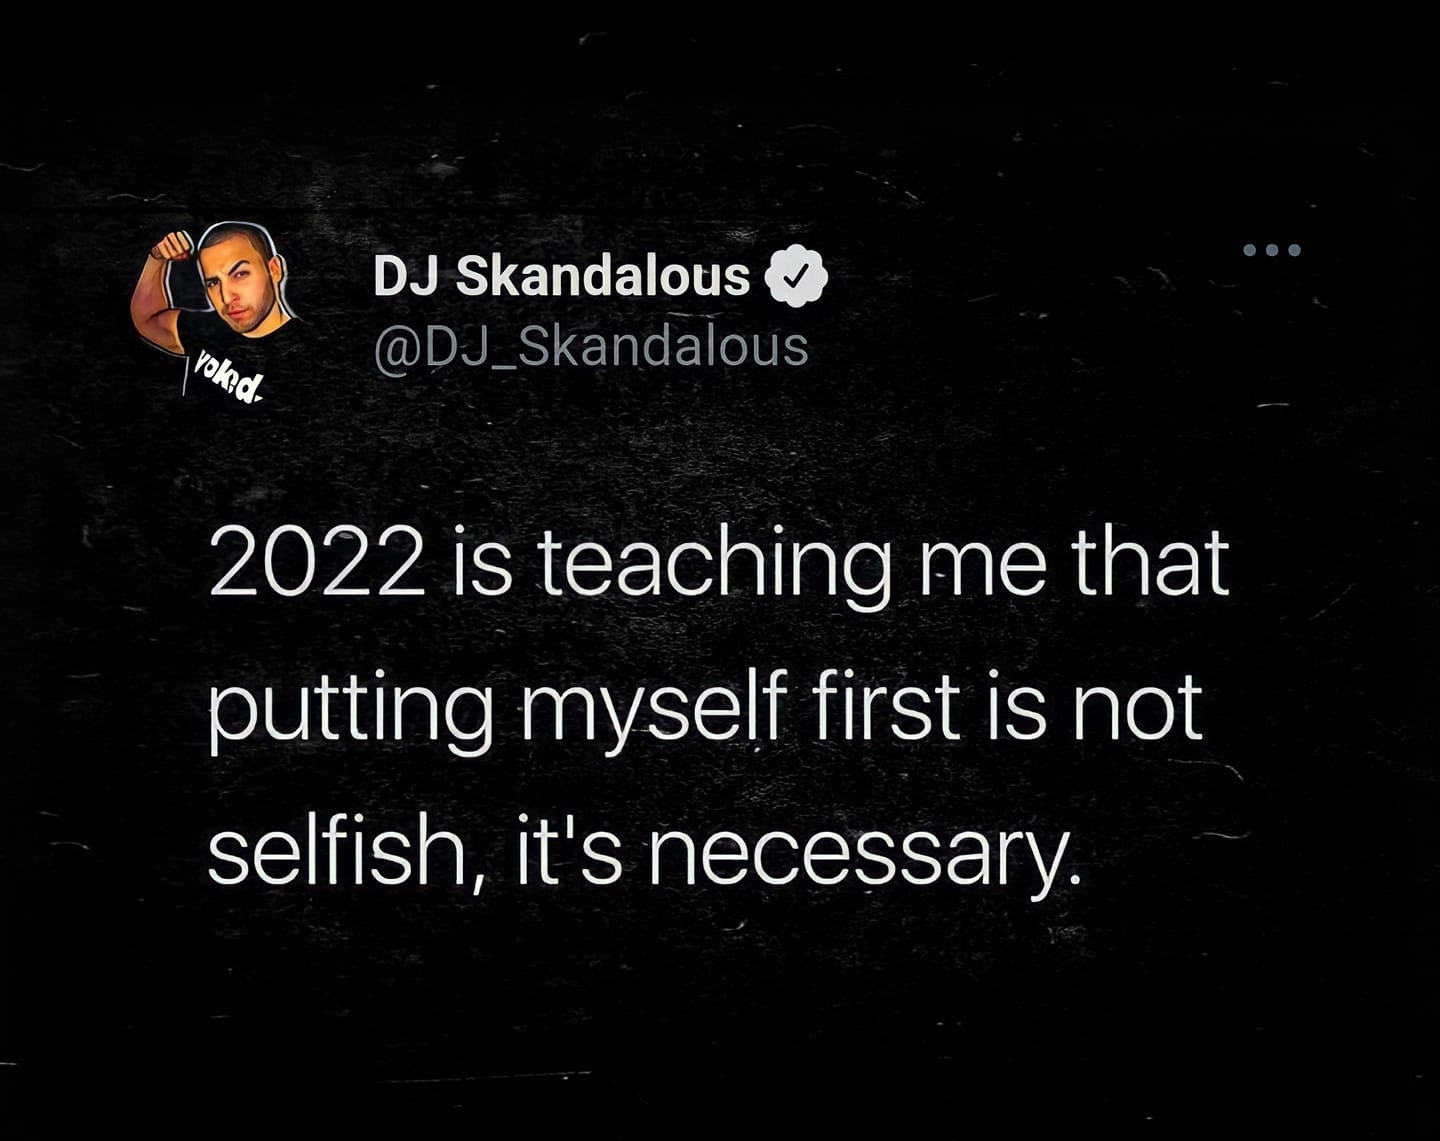 May be an image of 1 person and text that says 'DJ Skandalous @DJ_Skandalous Yokd. 2022 is teaching me that putting myself first is not selfish, it's necessary.'